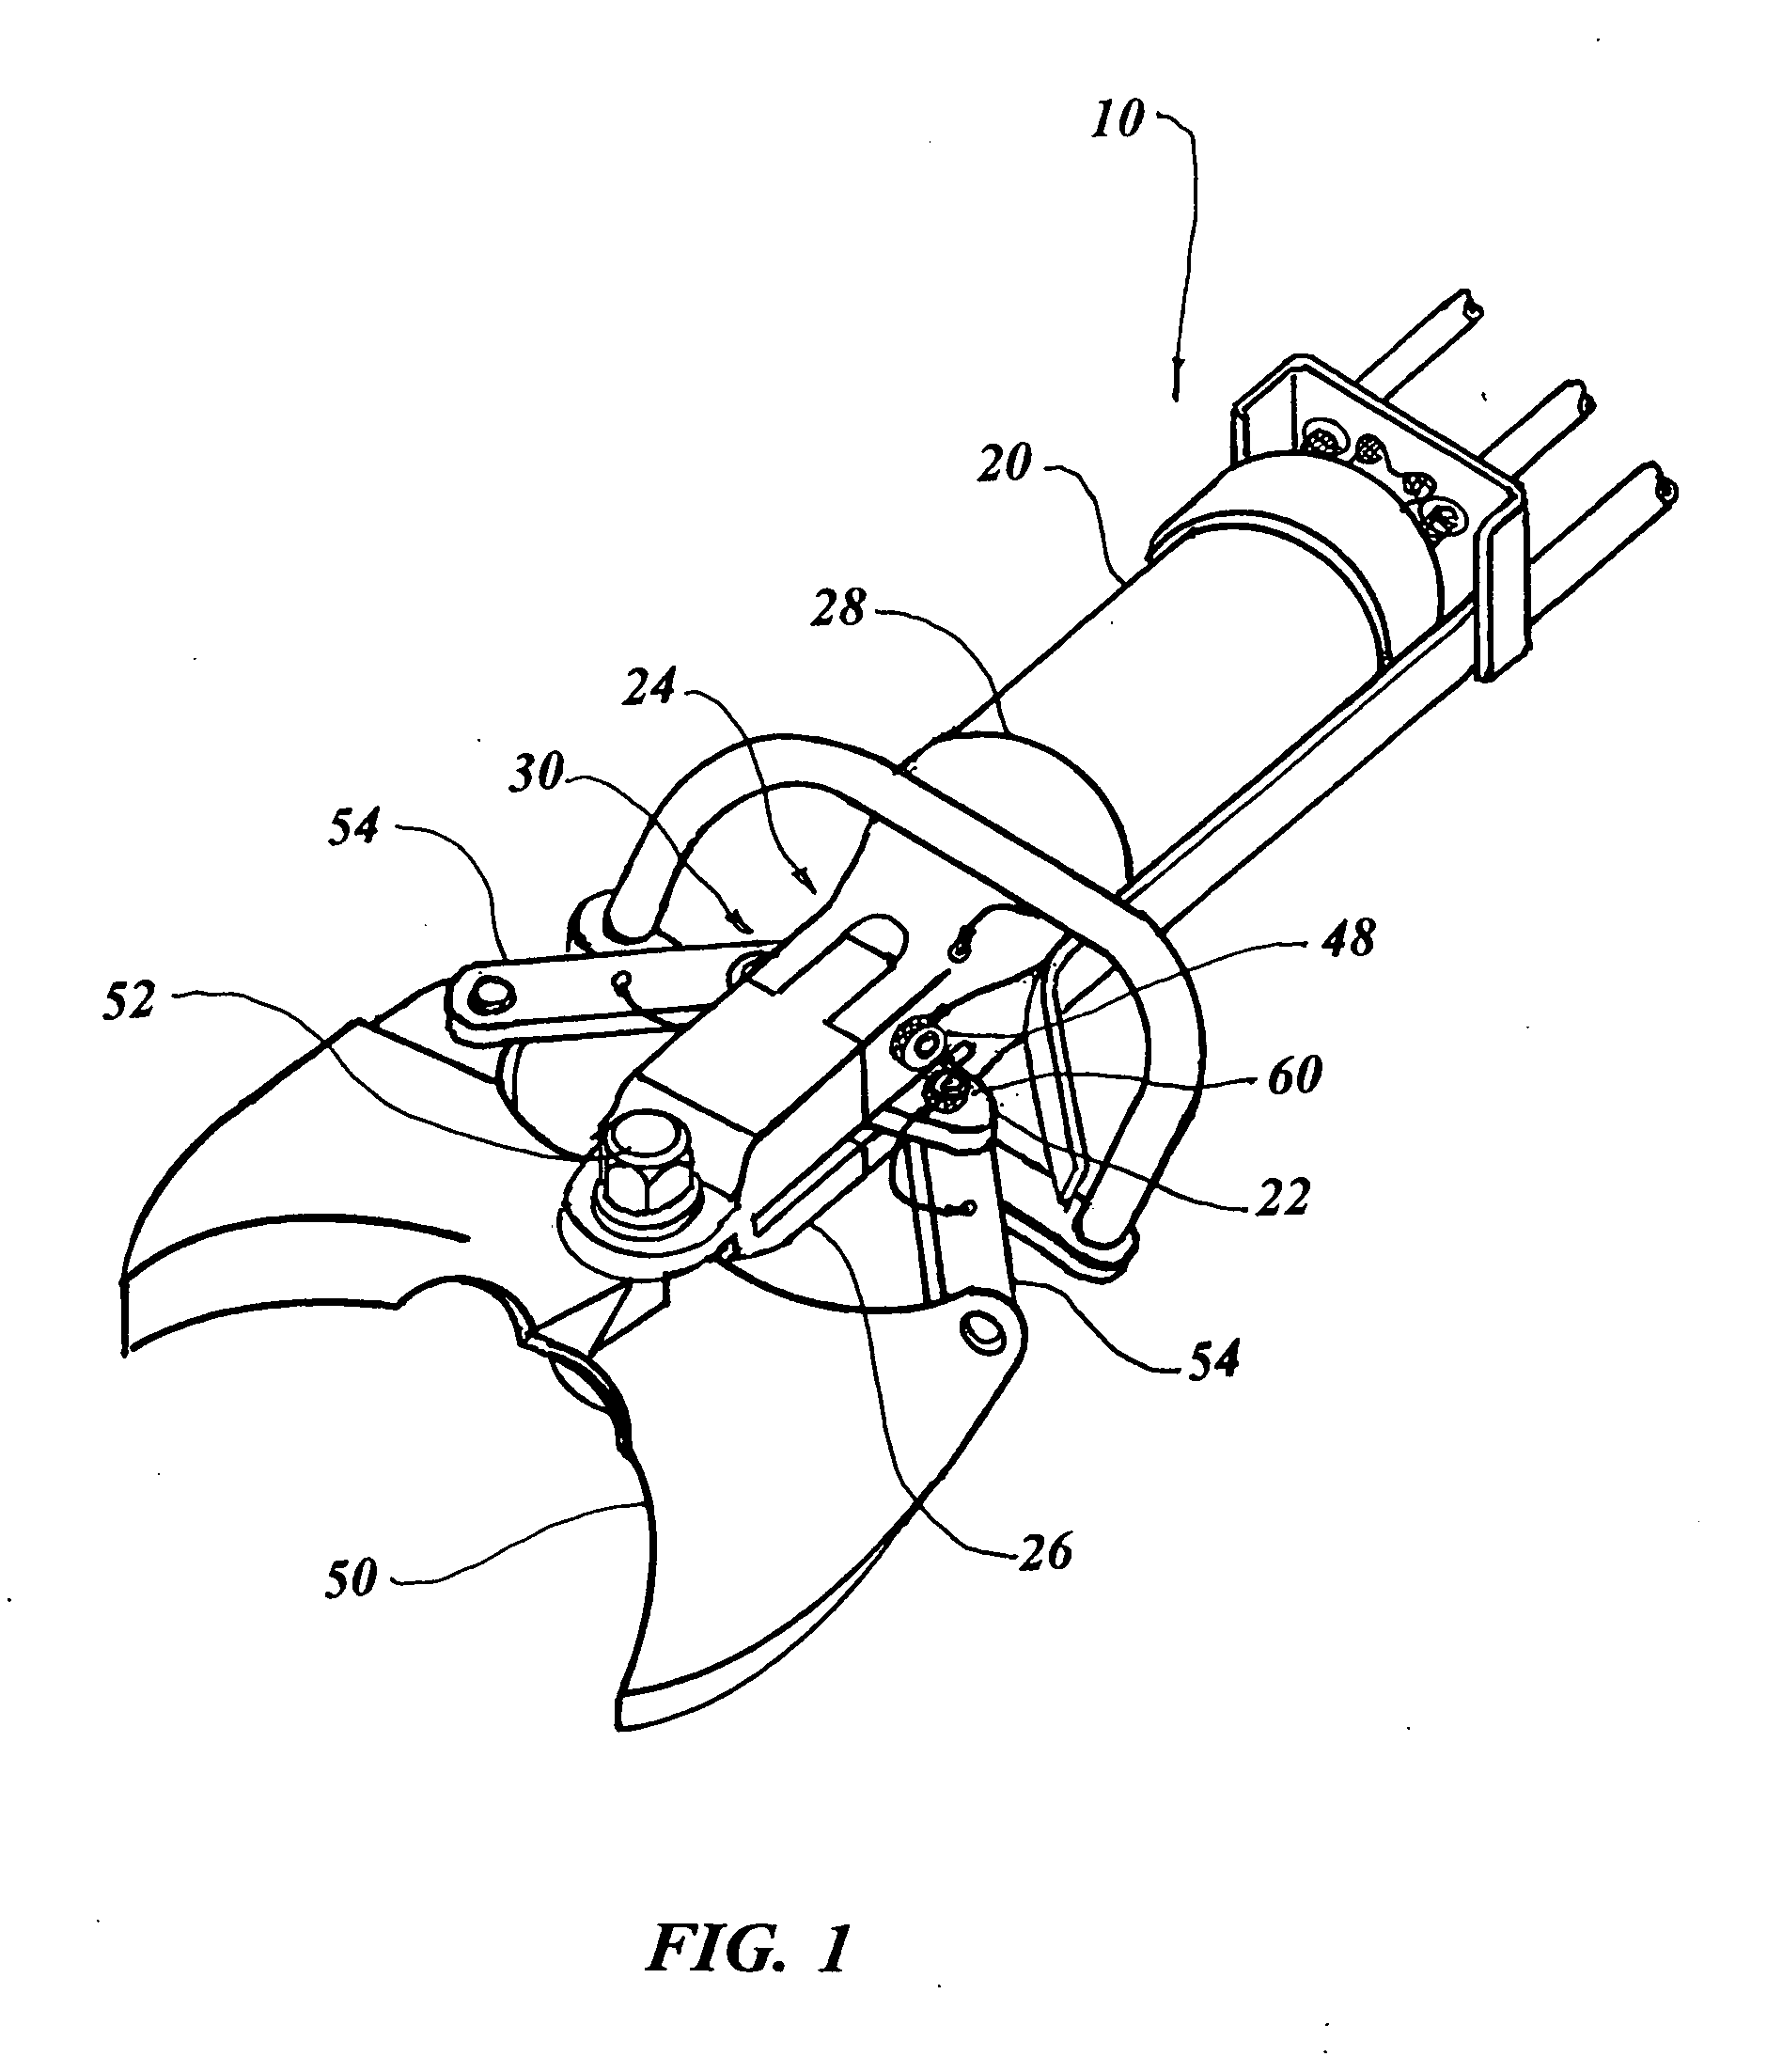 Hydraulic rescue tool with quick-change head